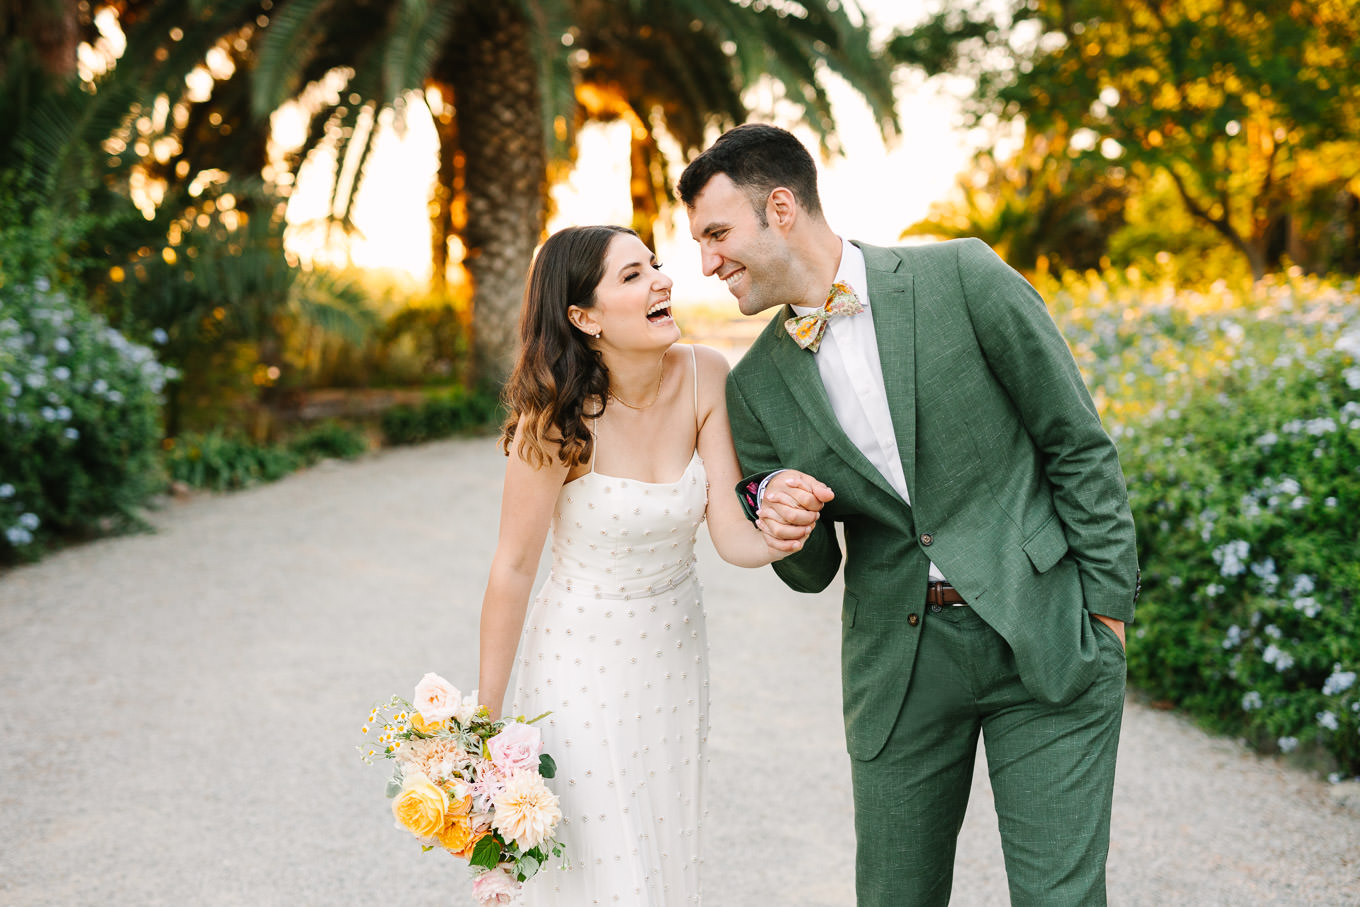 McCormick Home Ranch Wedding | Wedding and elopement photography roundup | Los Angeles and Palm Springs  photographer | #losangeleswedding #palmspringswedding #elopementphotographer

Source: Mary Costa Photography | Los Angeles